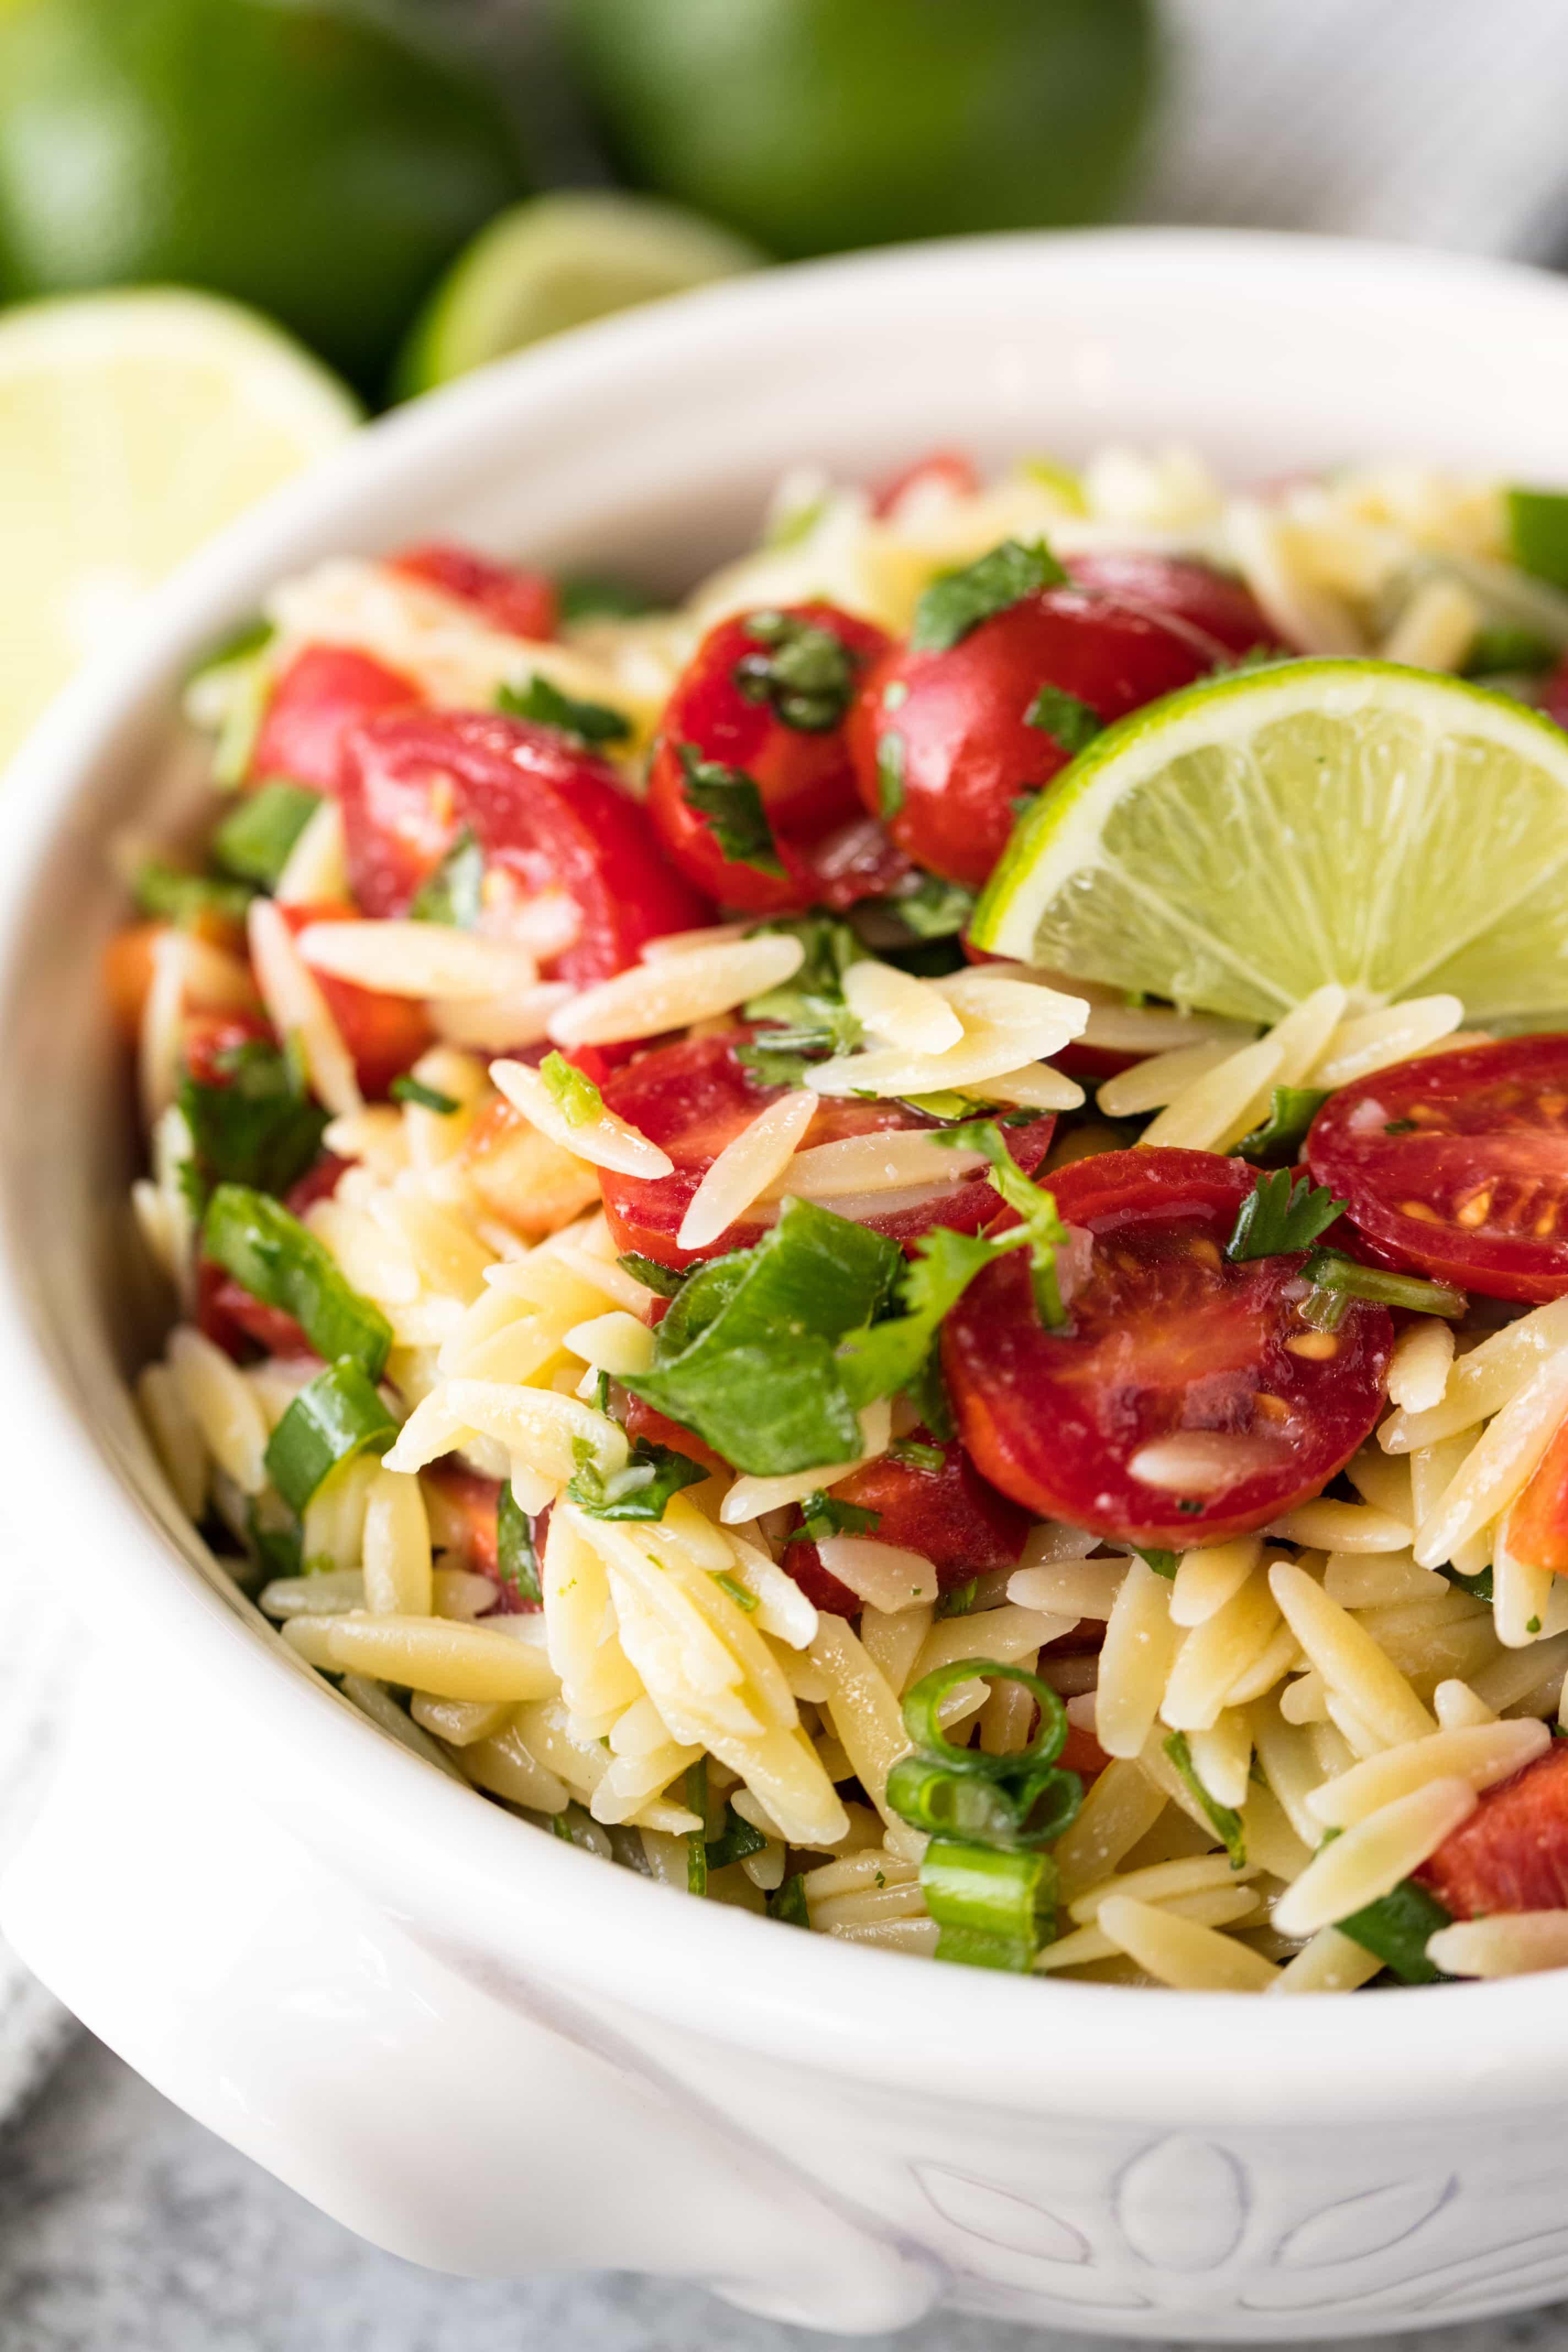 Cilantro-Lime Orzo Pasta Salad is light, refreshing, delicious, and perfect for picnics, potlucks, and backyard barbecues.